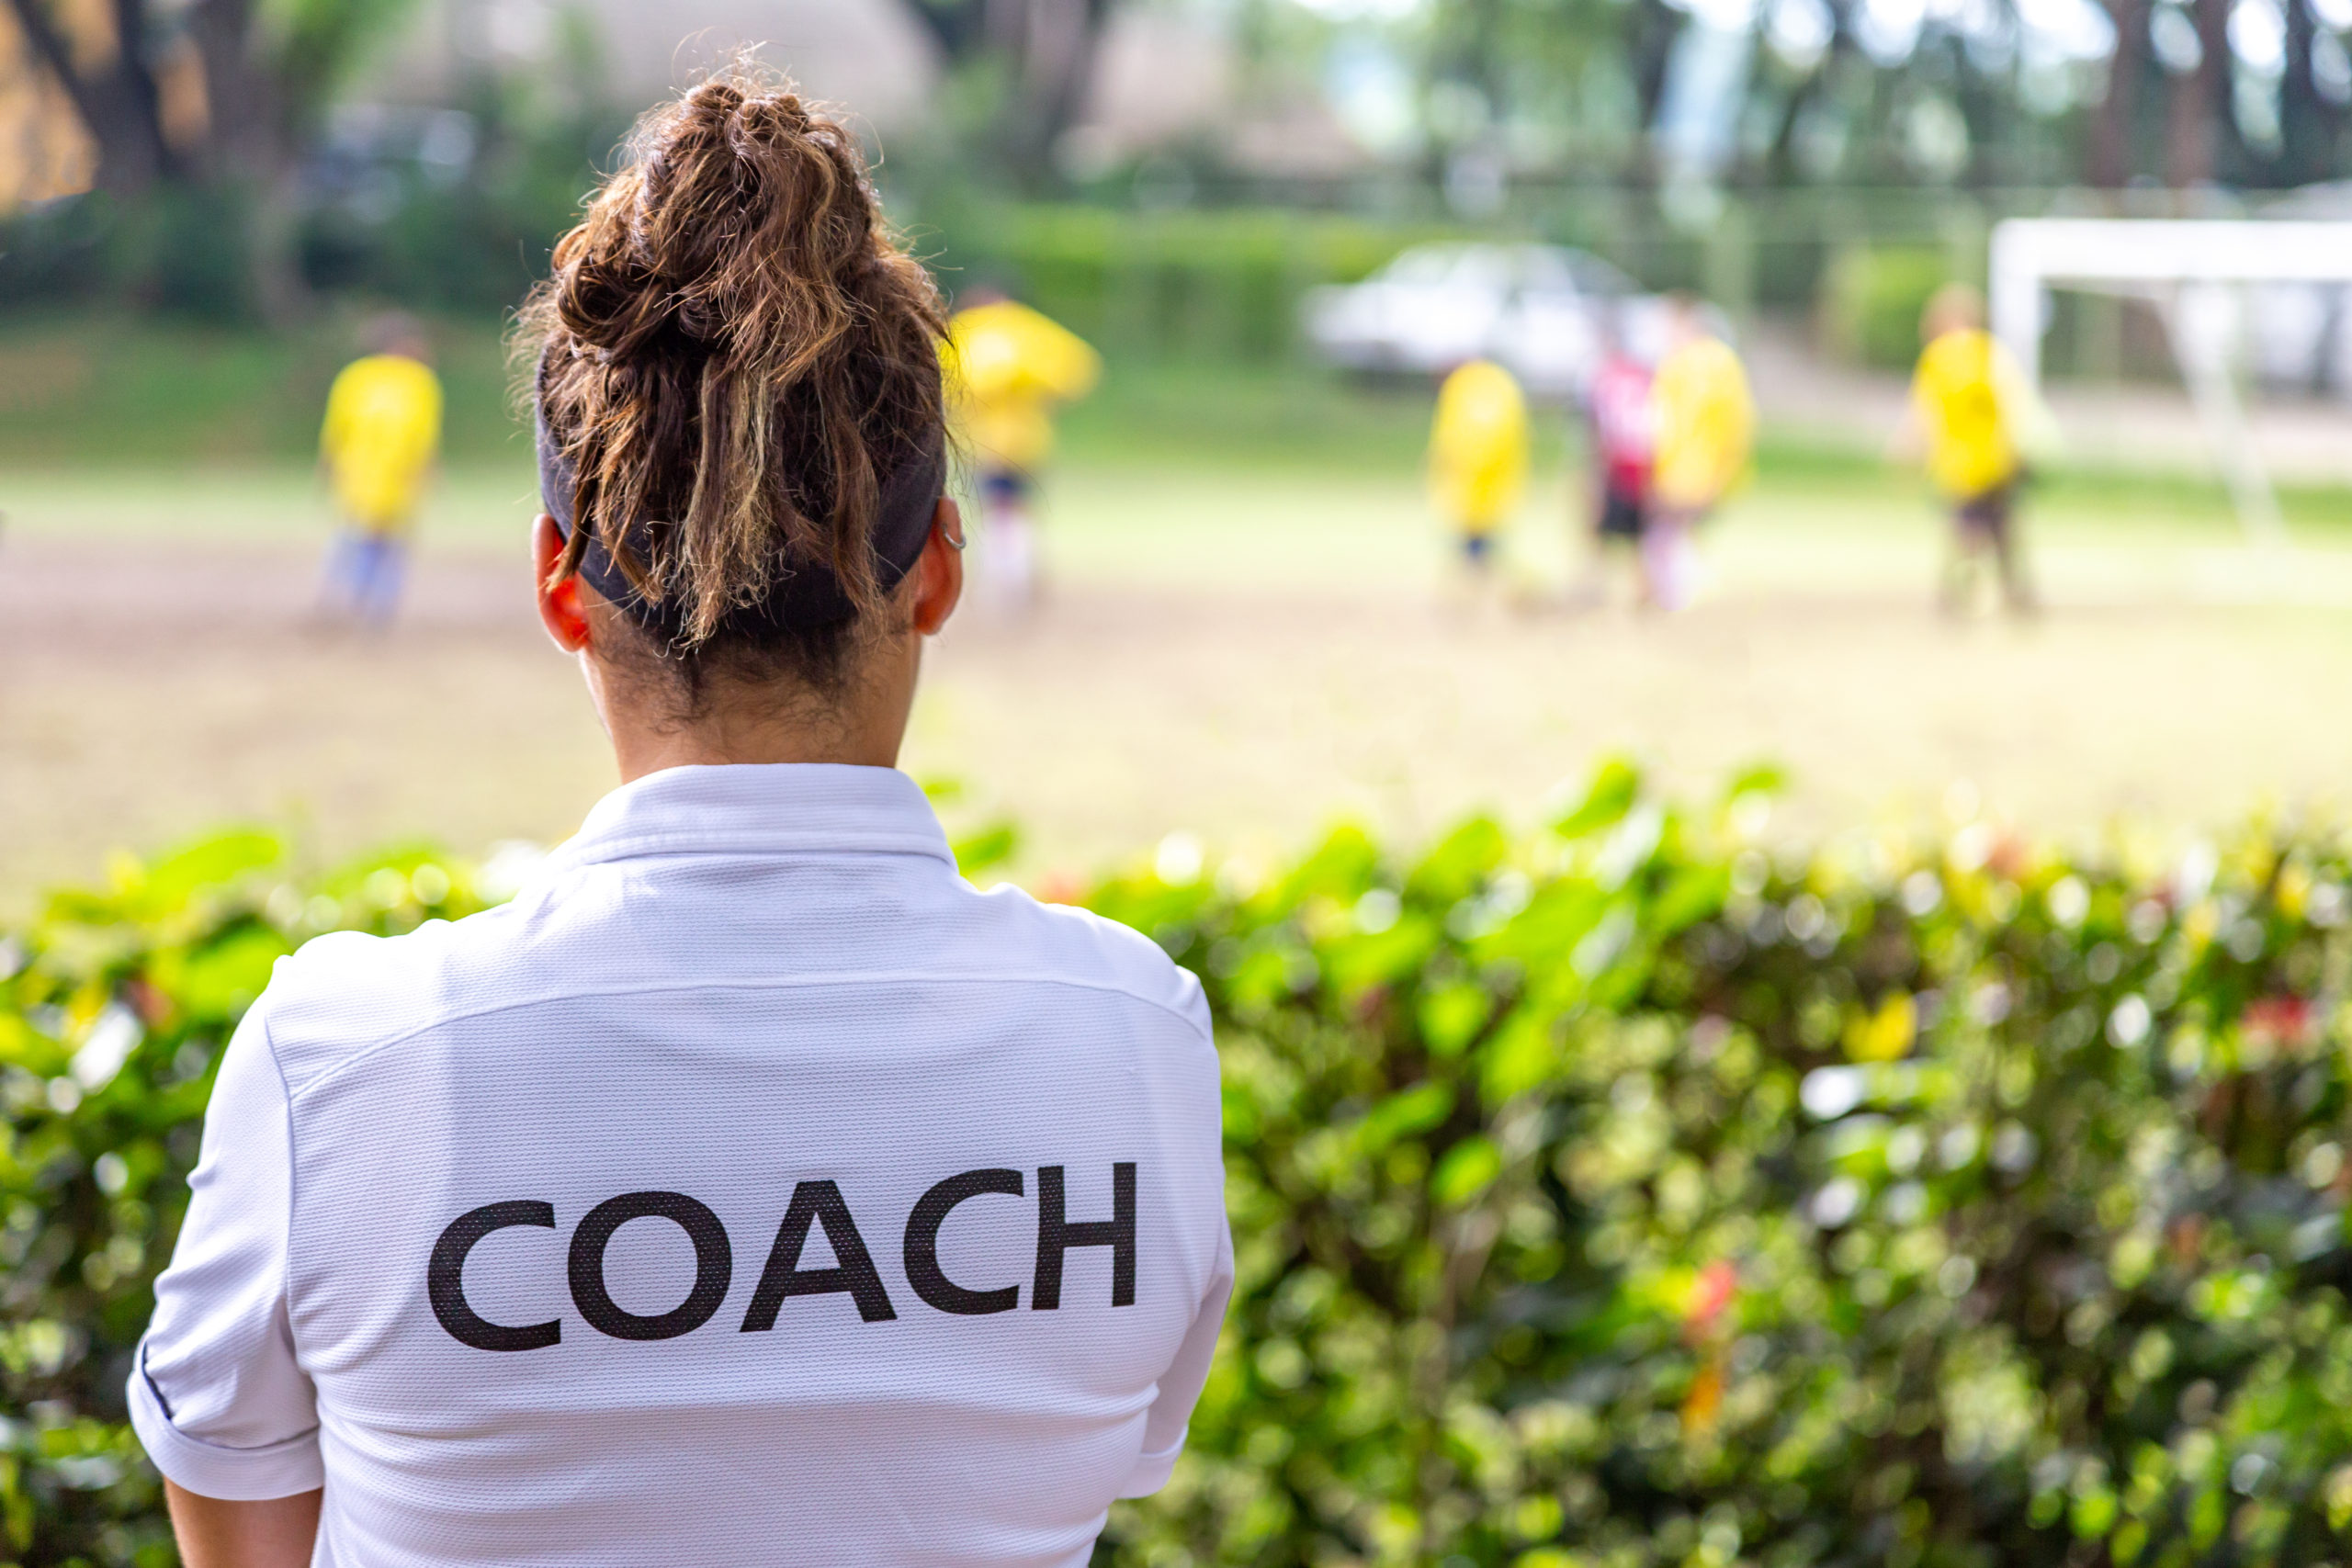 Female coach standing beside blurred playing field, her back to the camera with "Coach" written on her shirt.